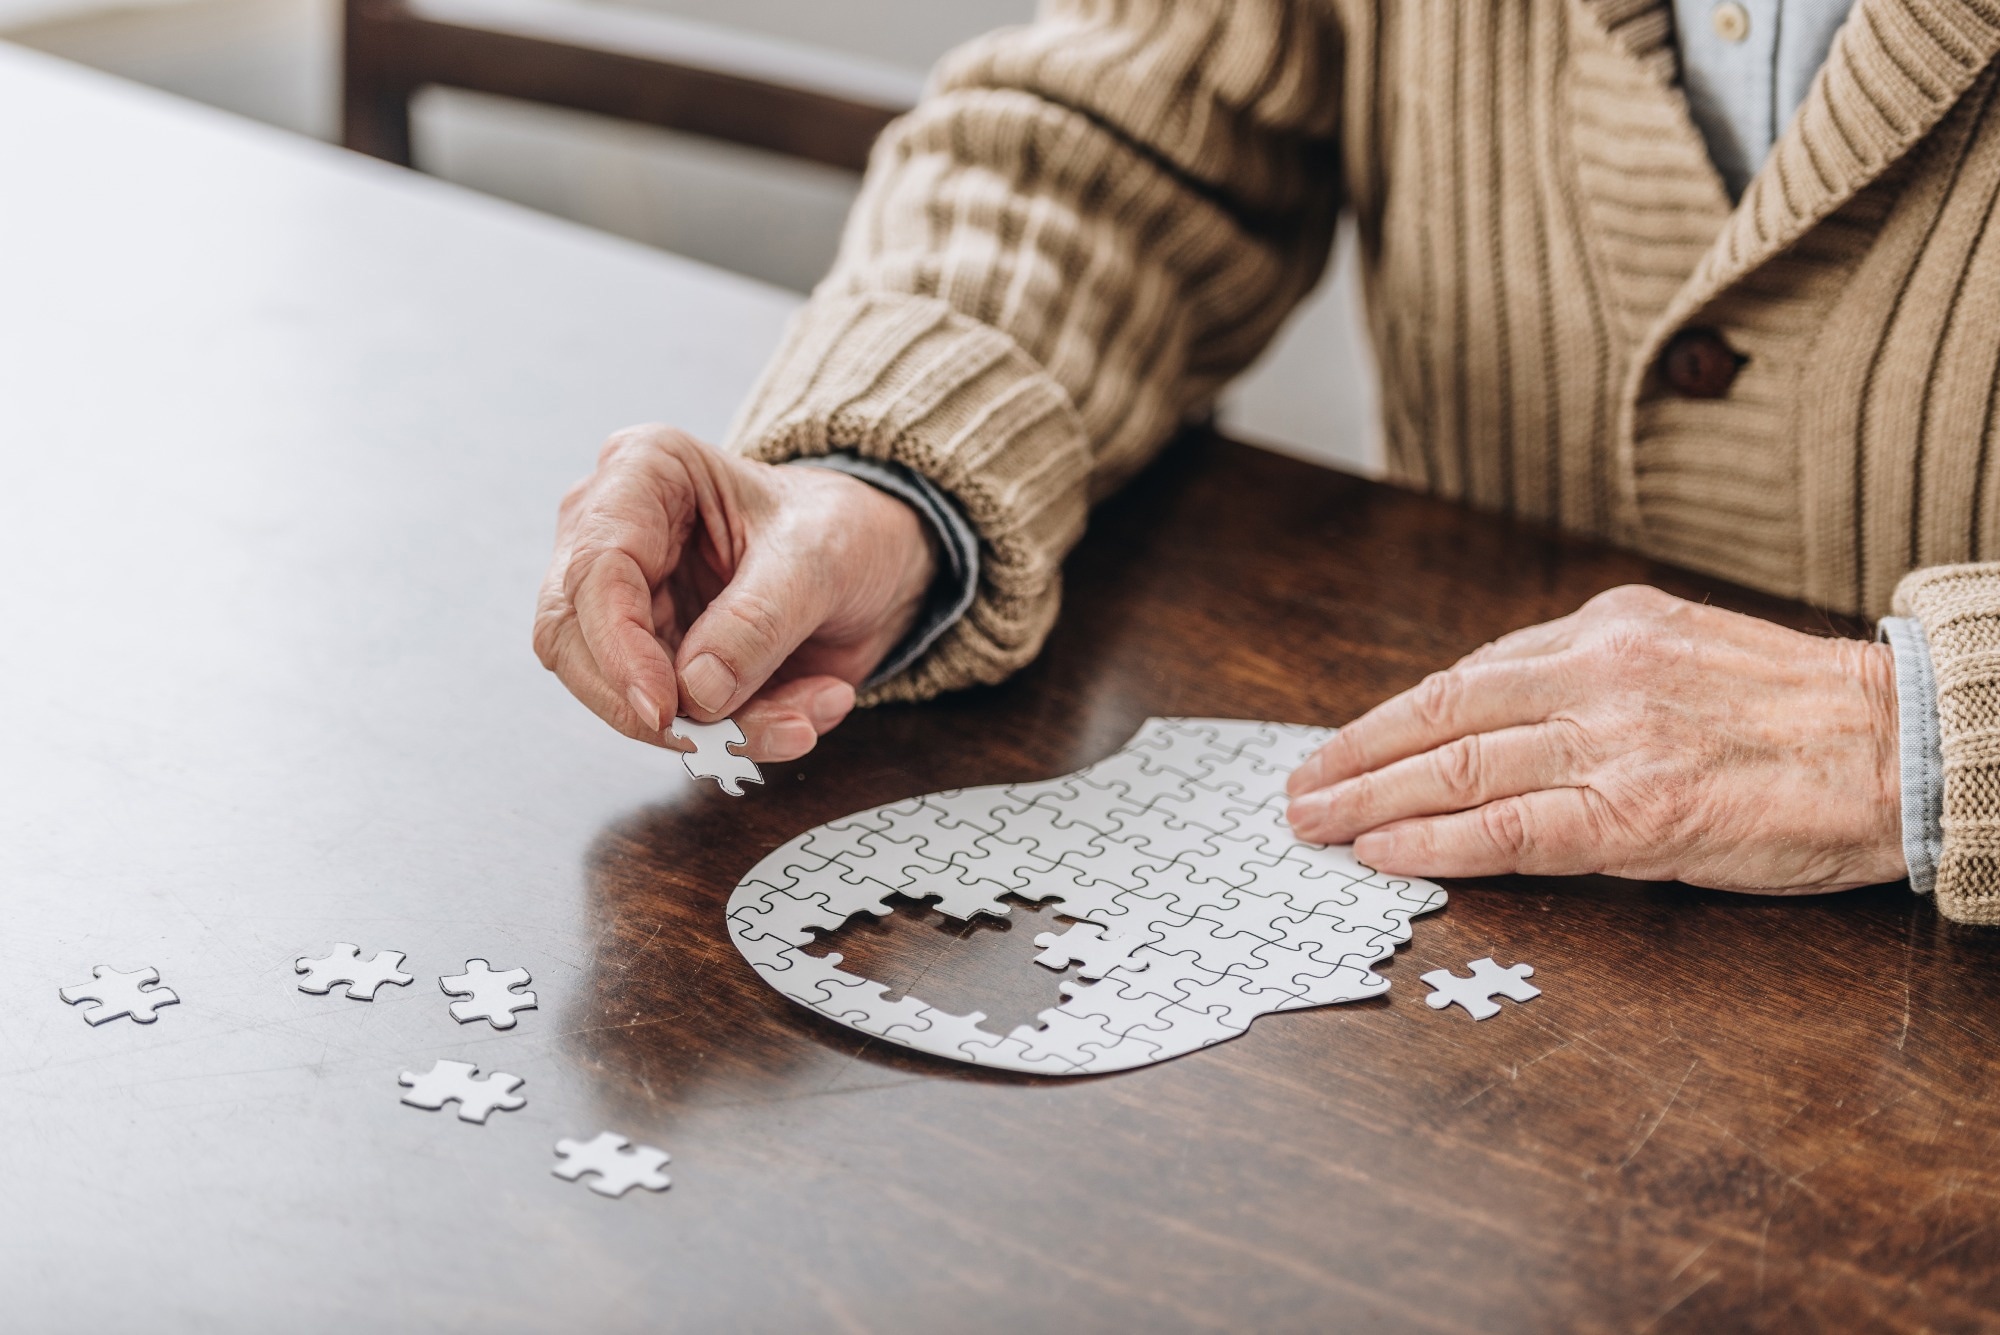 Study: Neuroimaging and machine learning for studying the pathways from mild cognitive impairment to alzheimer’s disease: a systematic review. Image Credit: LightField Studios/Shutterstock.com